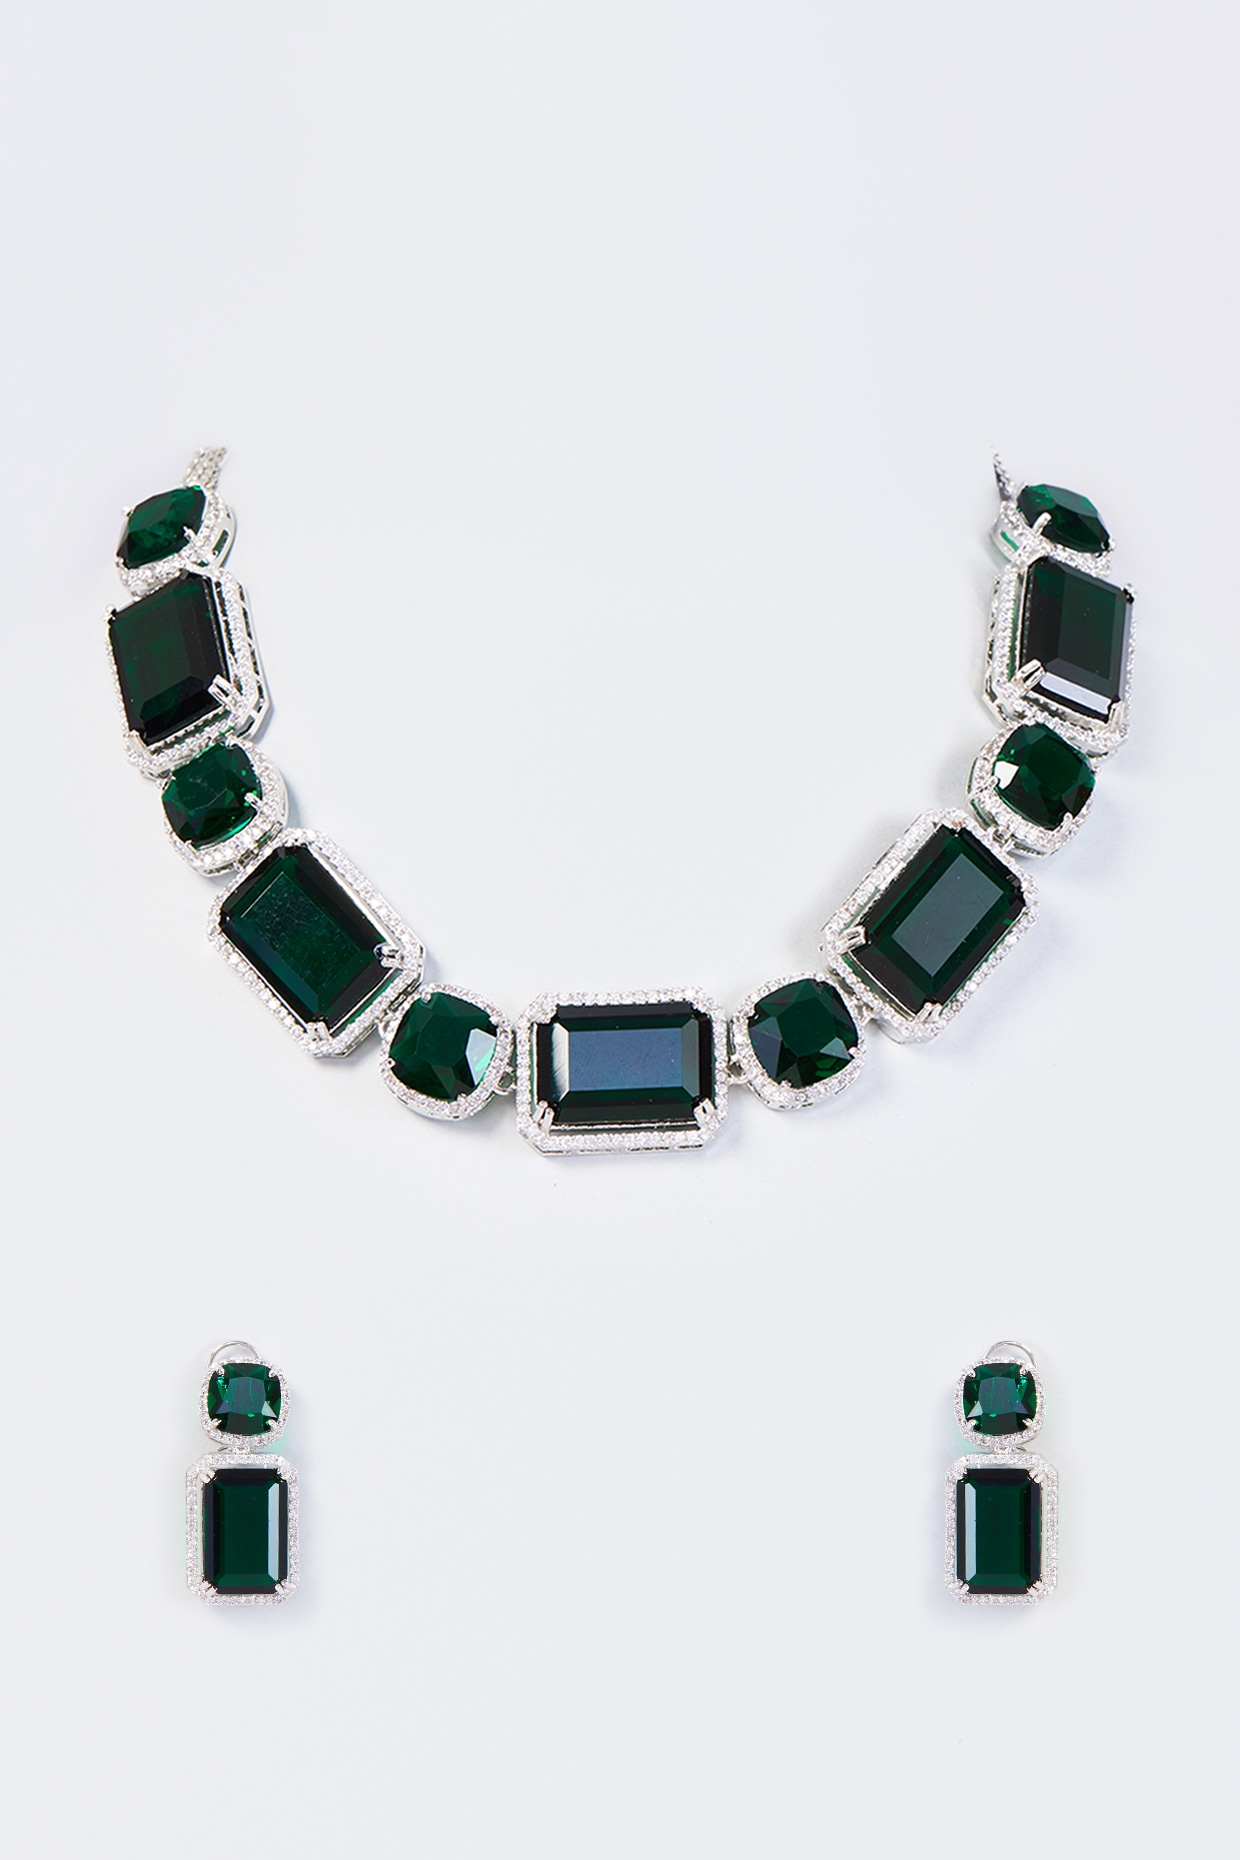 Buy Brazilian Emerald Crystal Pendant with White Diamond in 22K at Nancy  Troske Jewelry for only $1,900.00